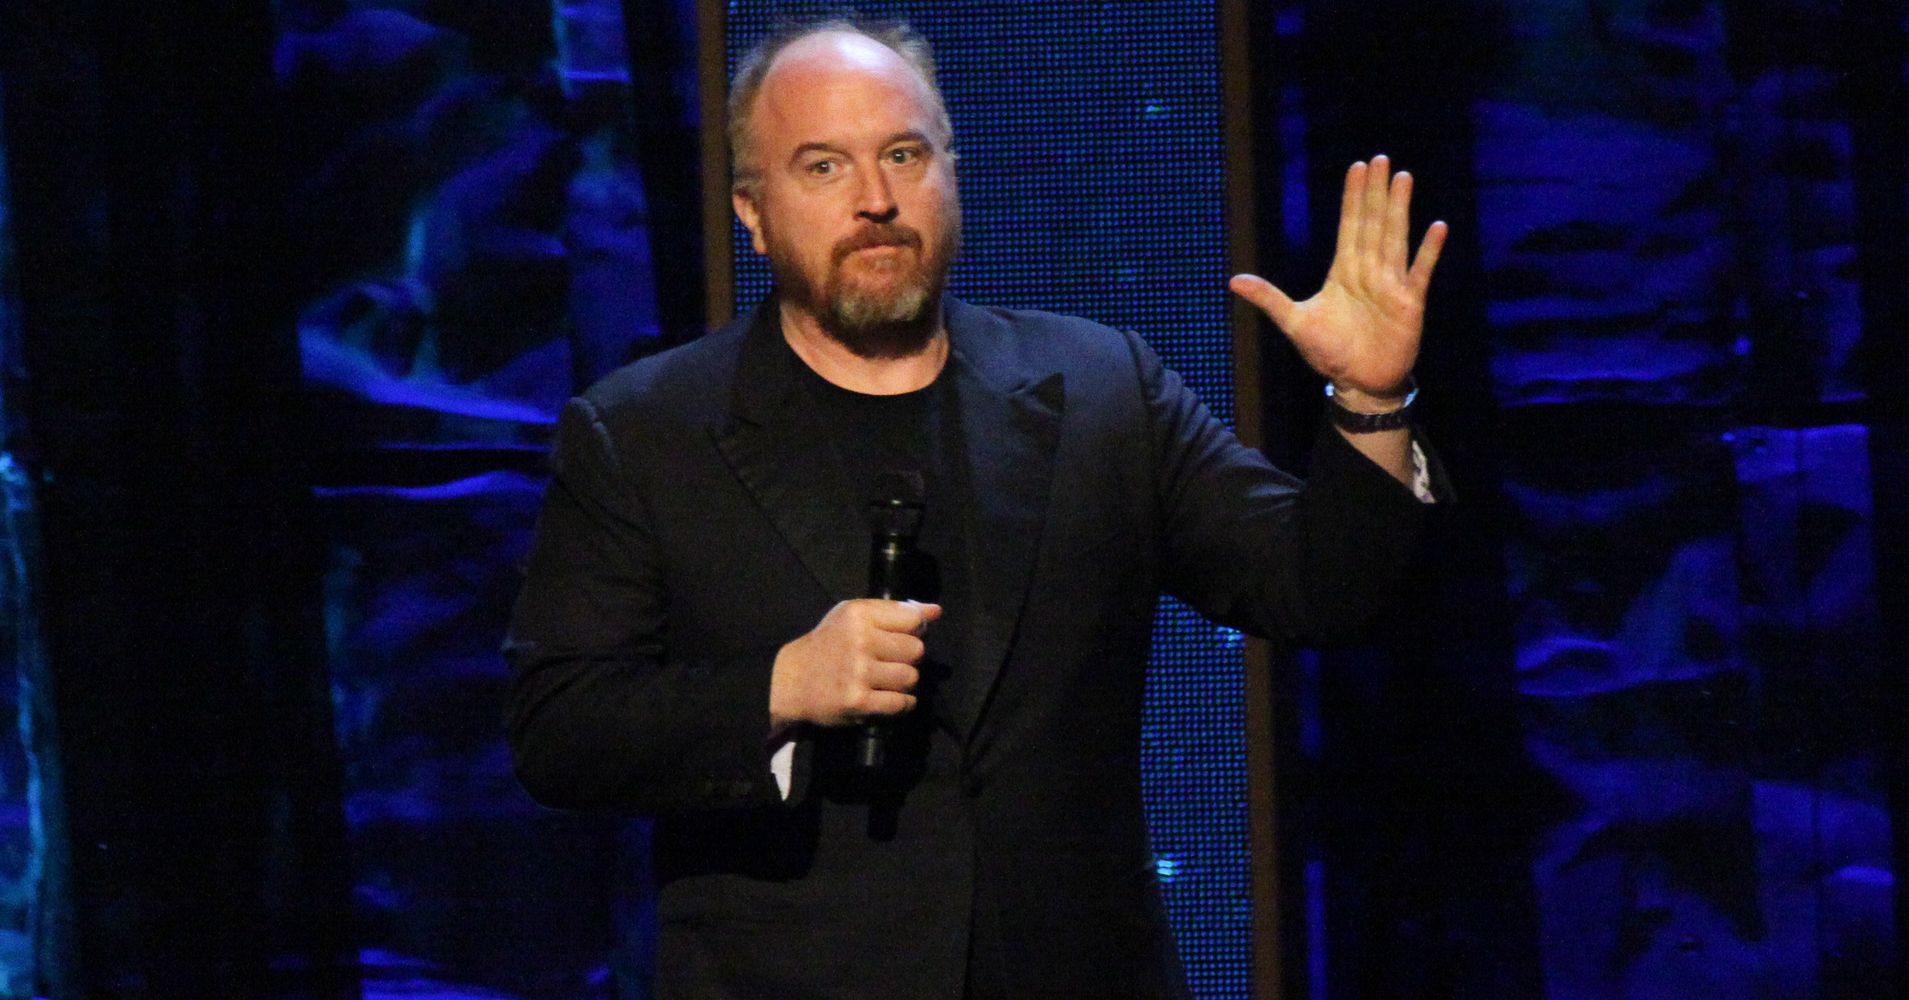 Louis C.K. Jokes About Sexual Harassment In New Set, Appears To Have Learned Nothing Again ...